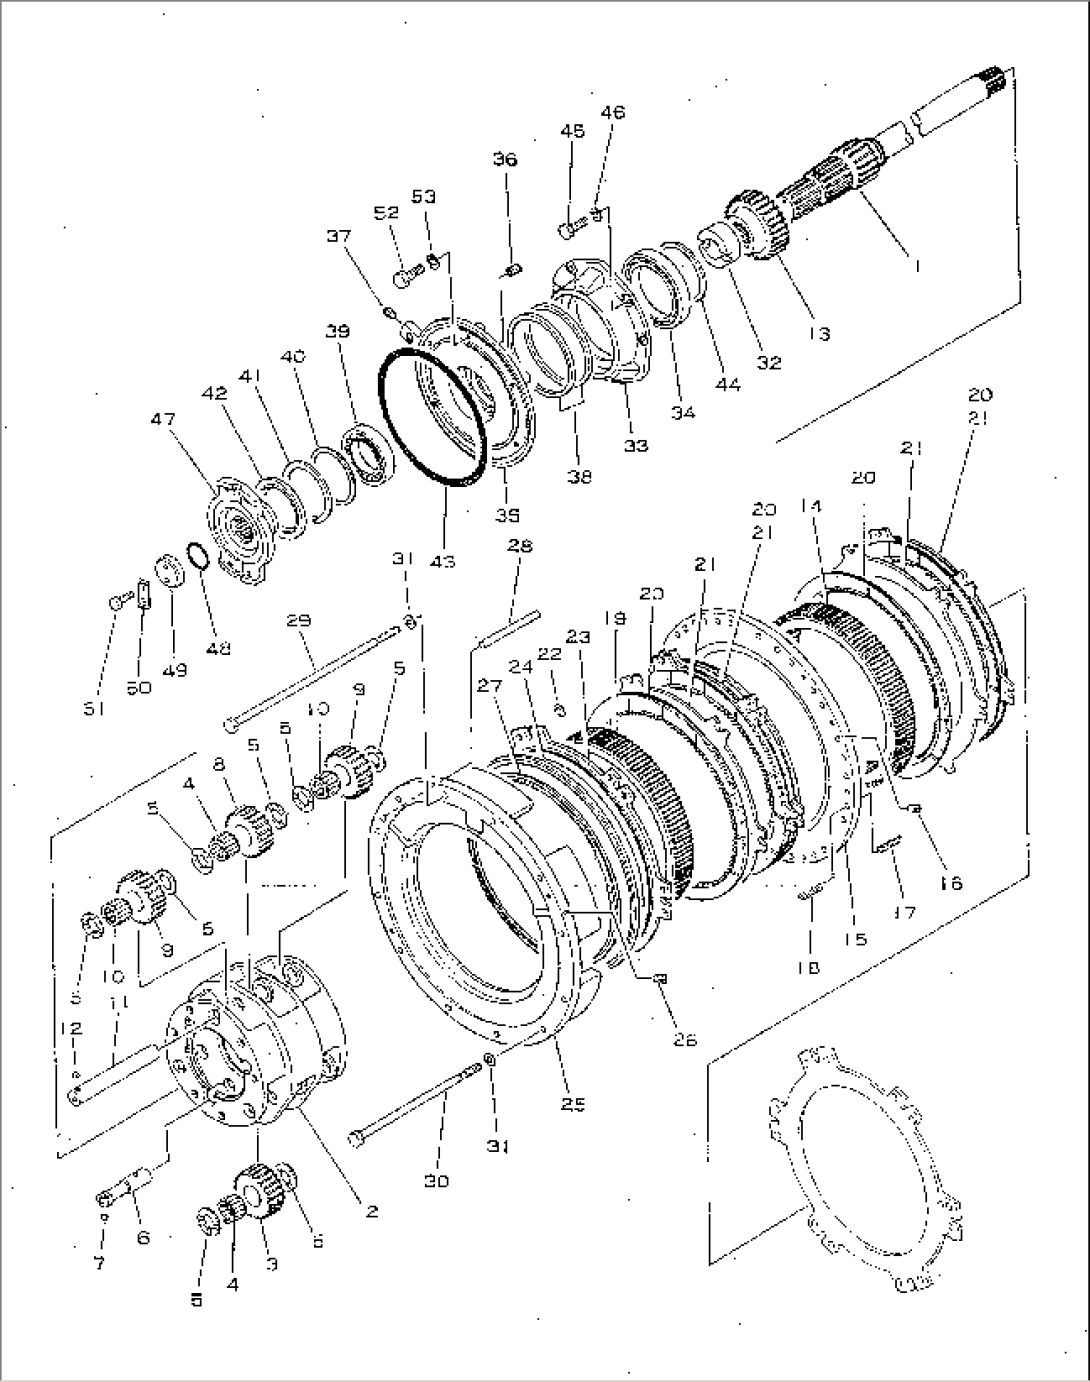 TRANSMISSION GEAR AND SHAFT (1/3)